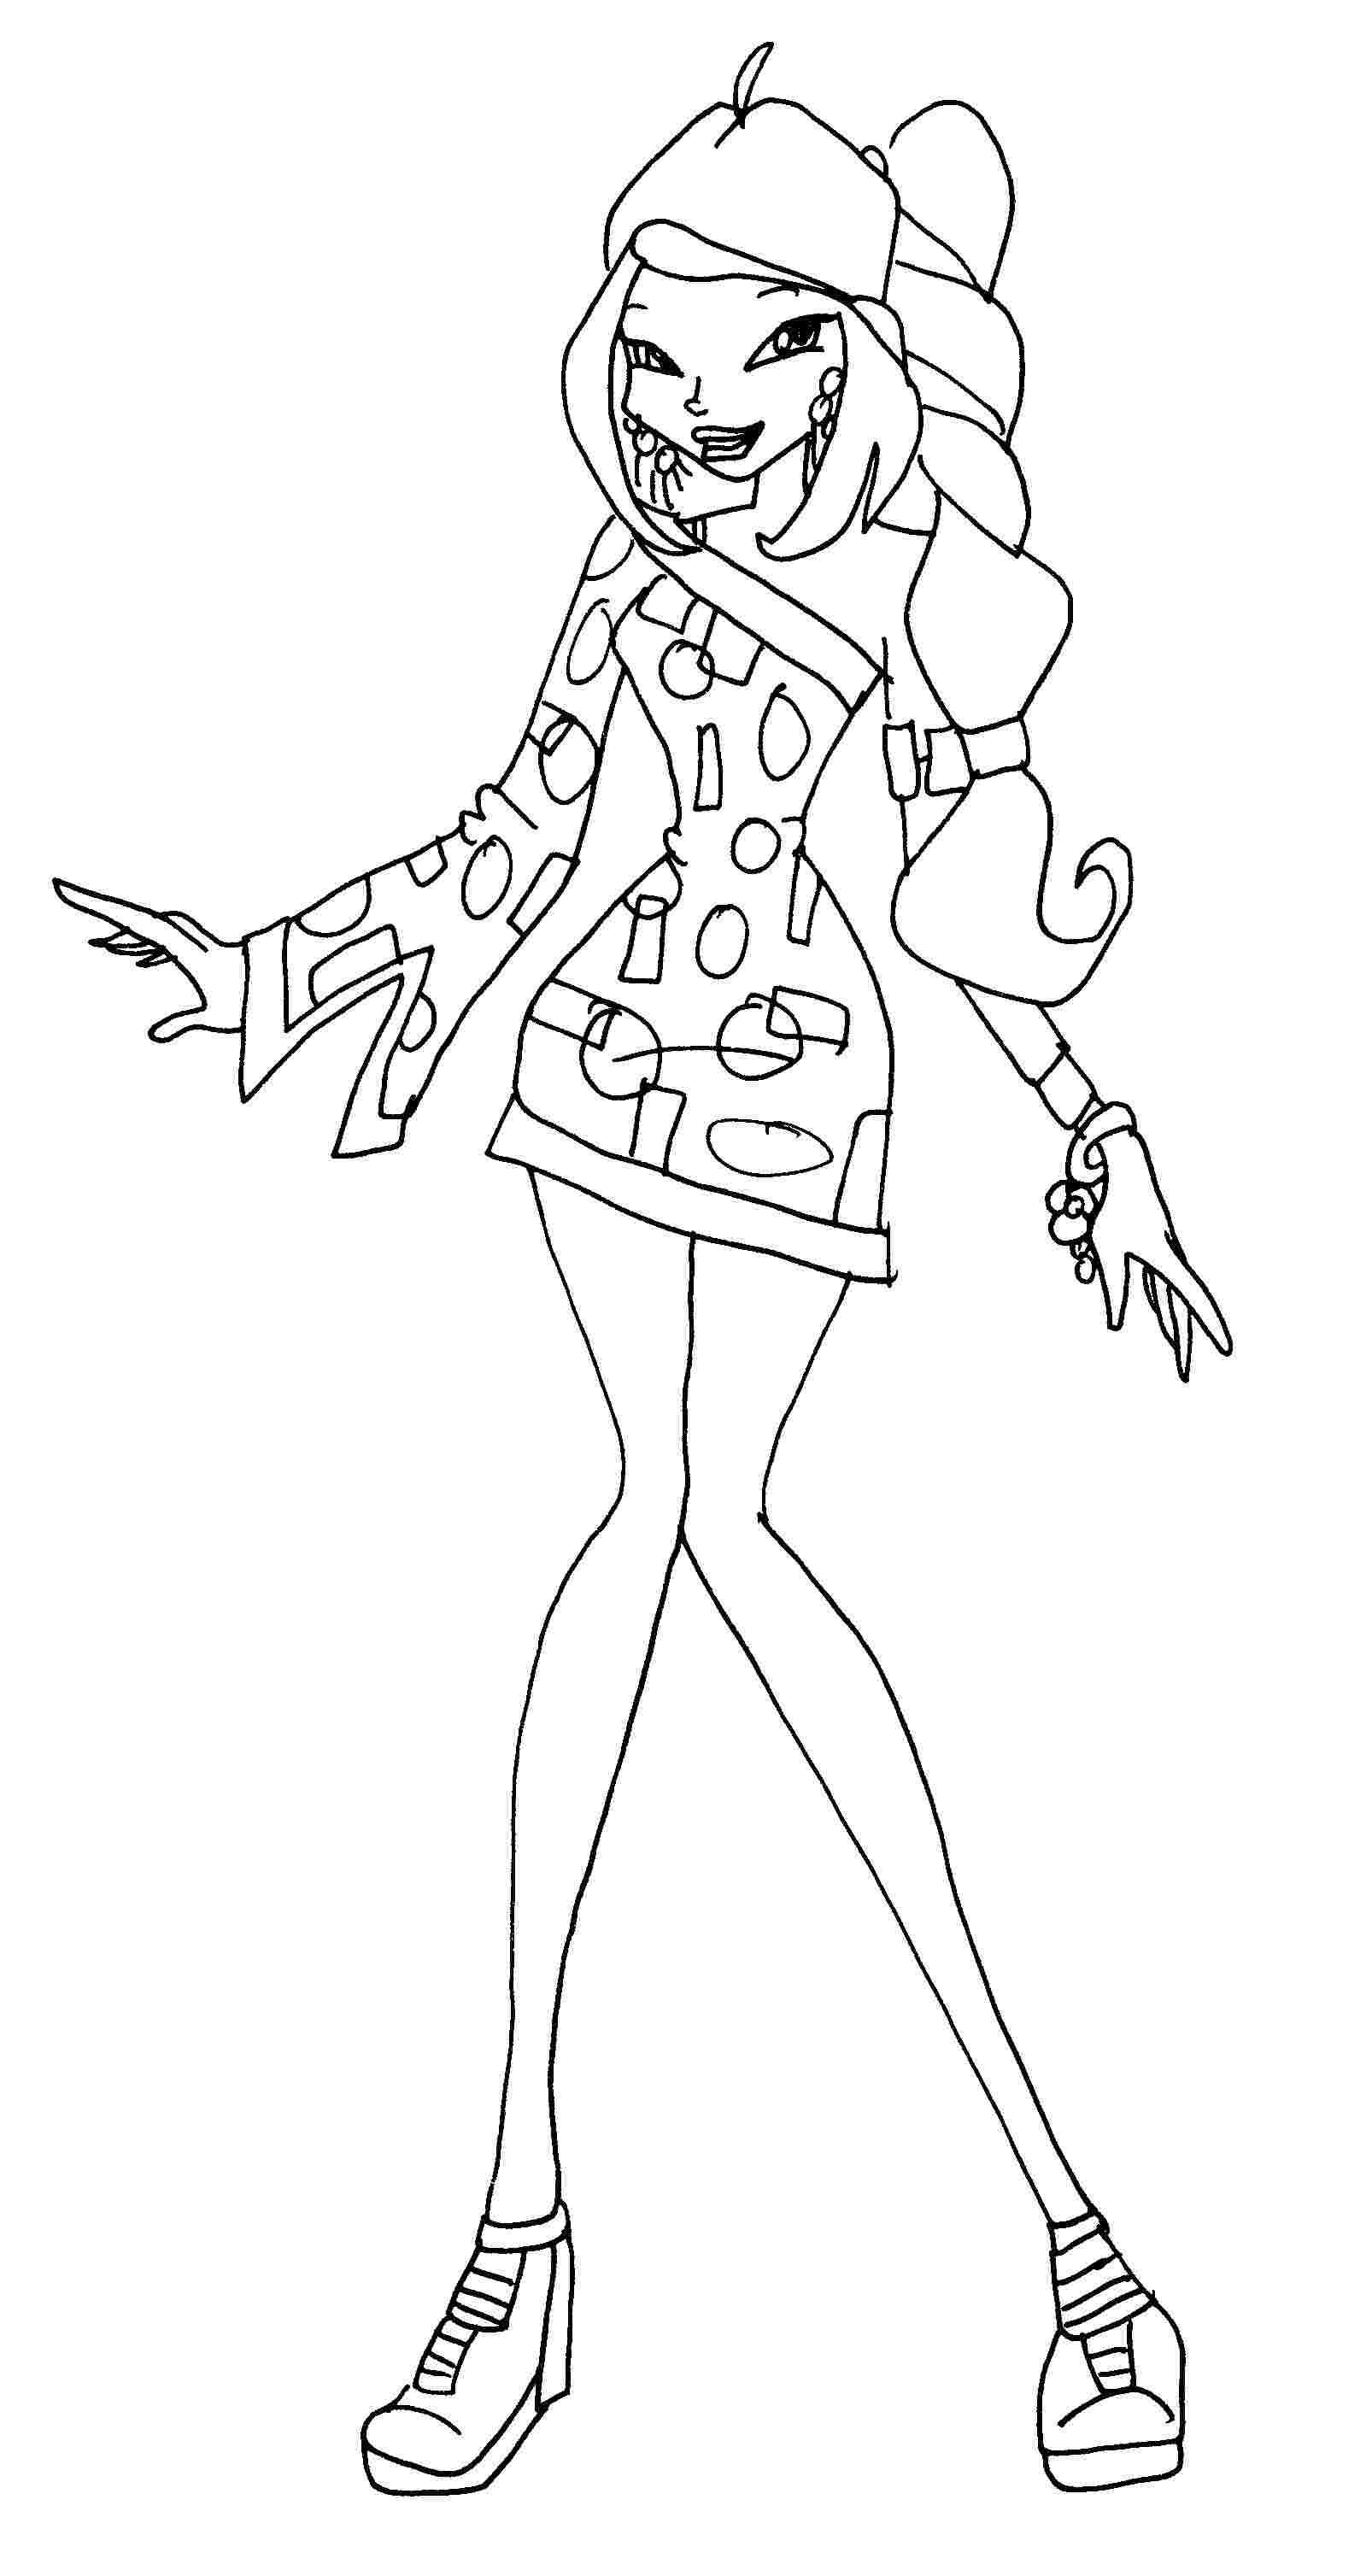  Winx Club Coloring Pages | Hot Winx Club |#10